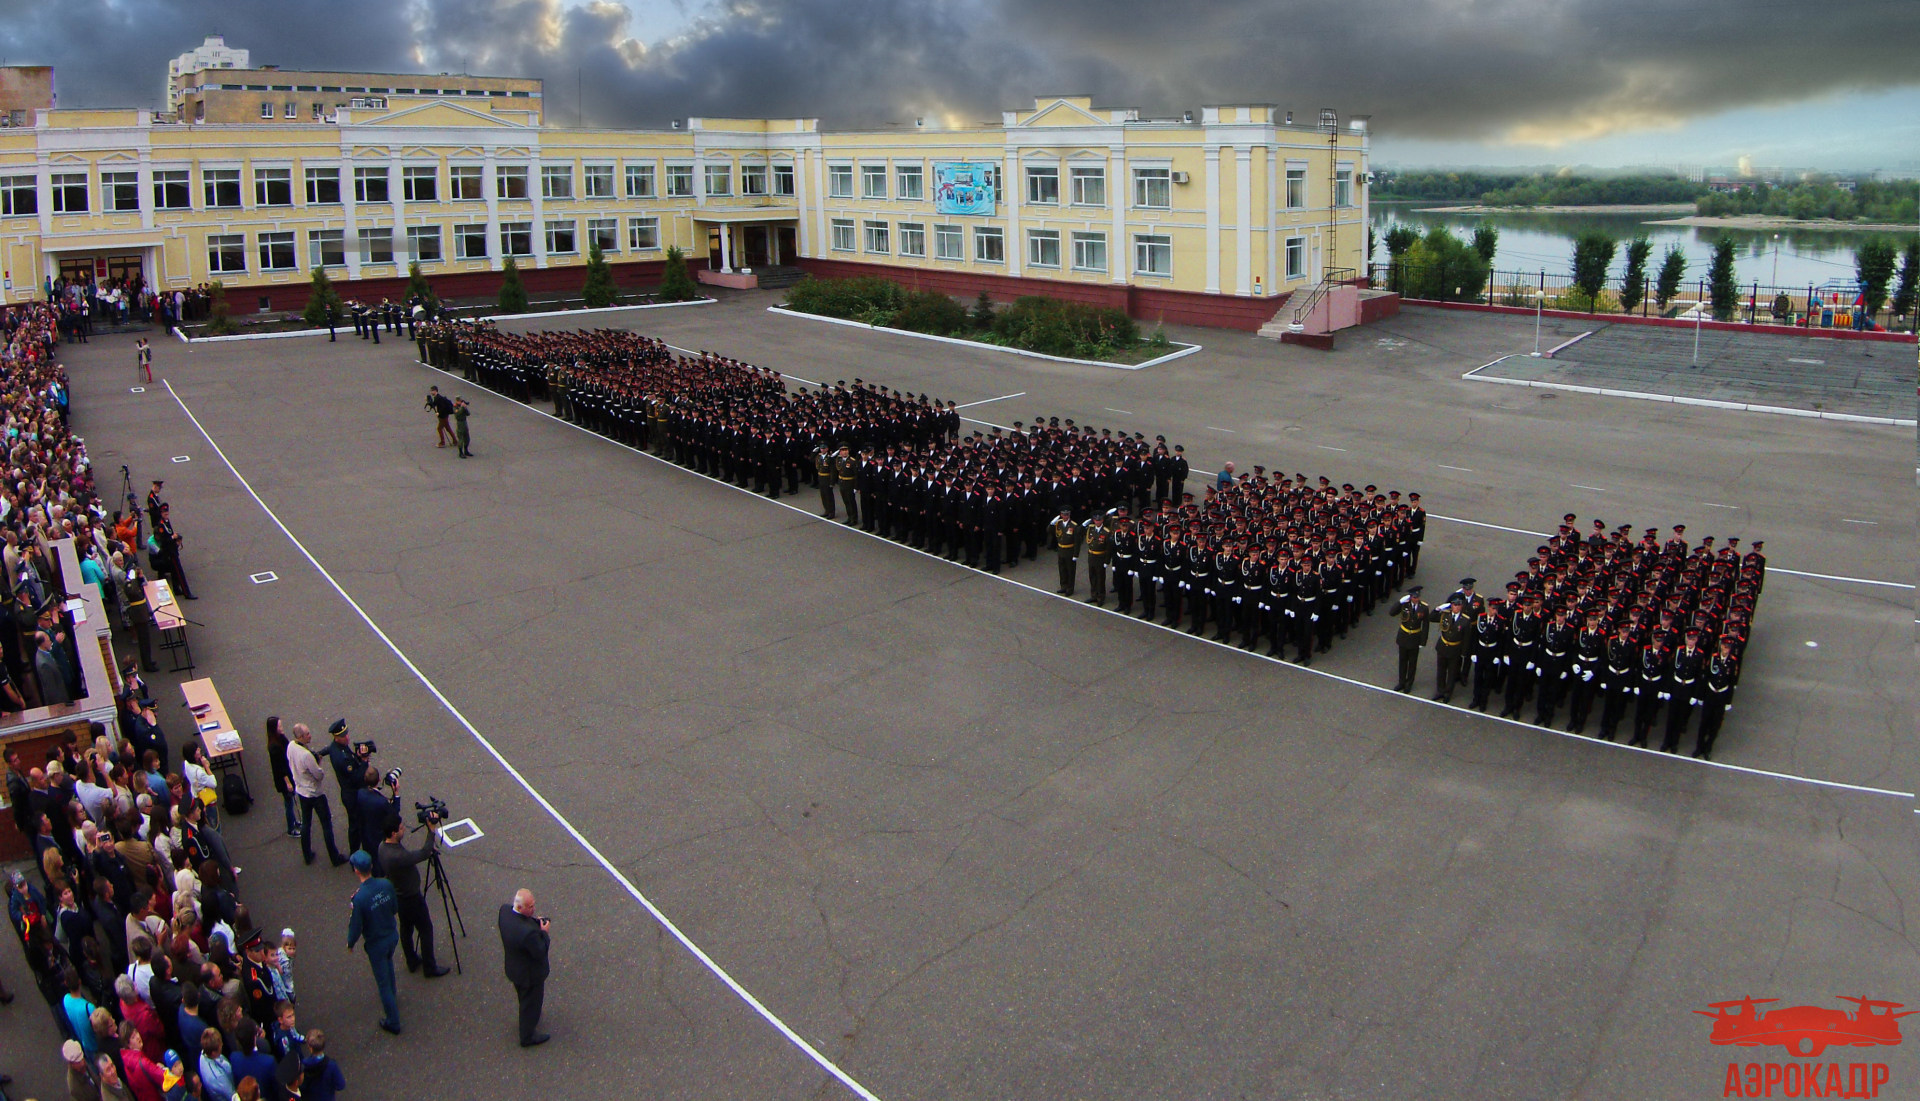 oath cadets to enroll in military school